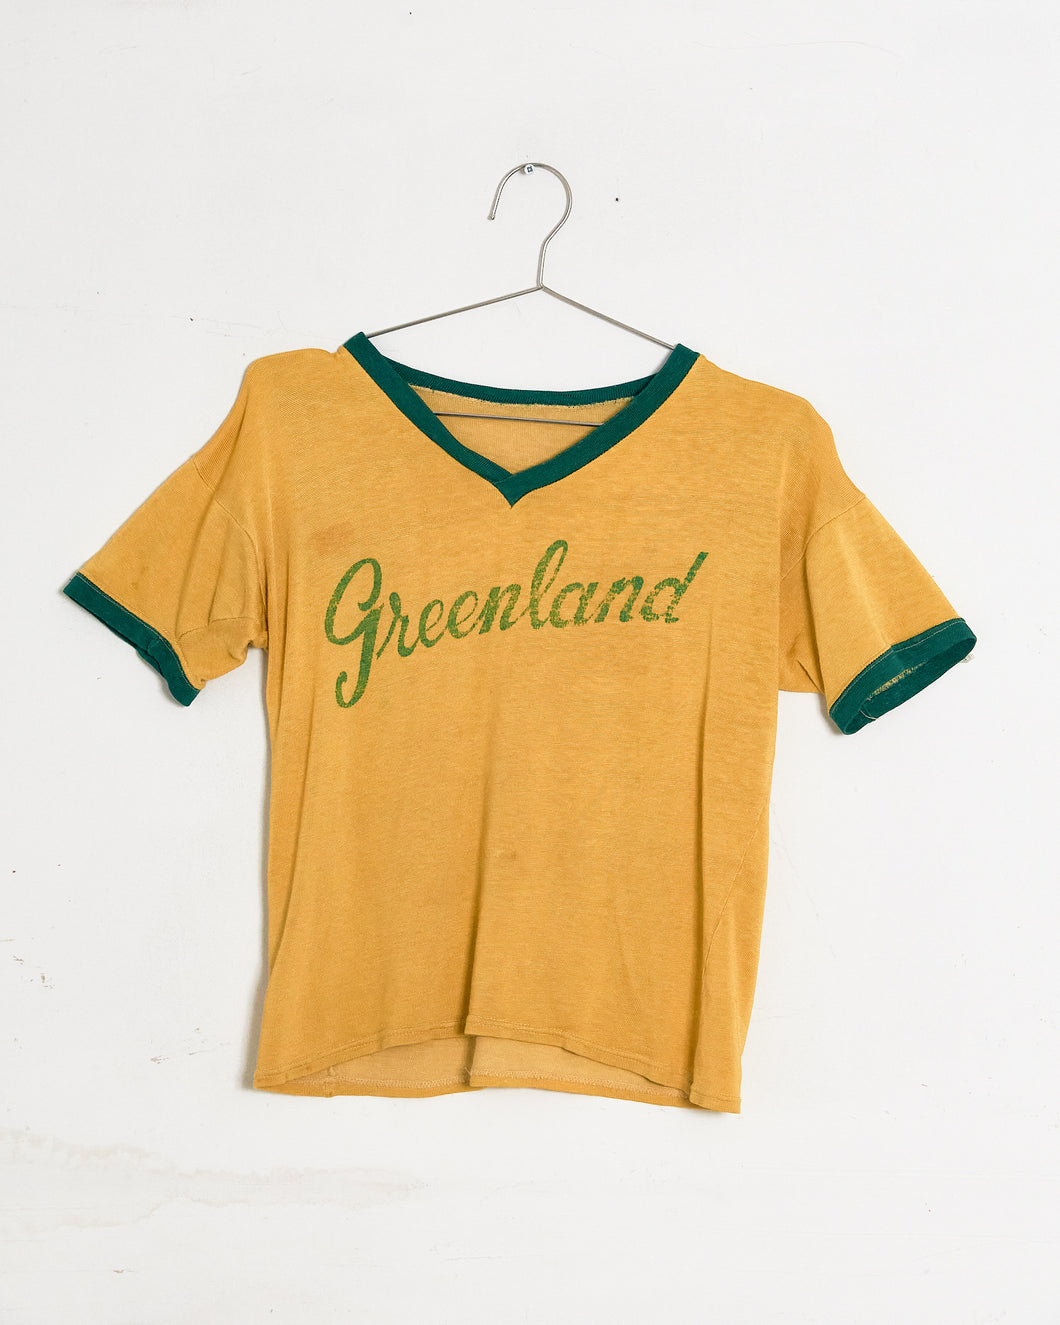 1960s Greenland S/S Jersey